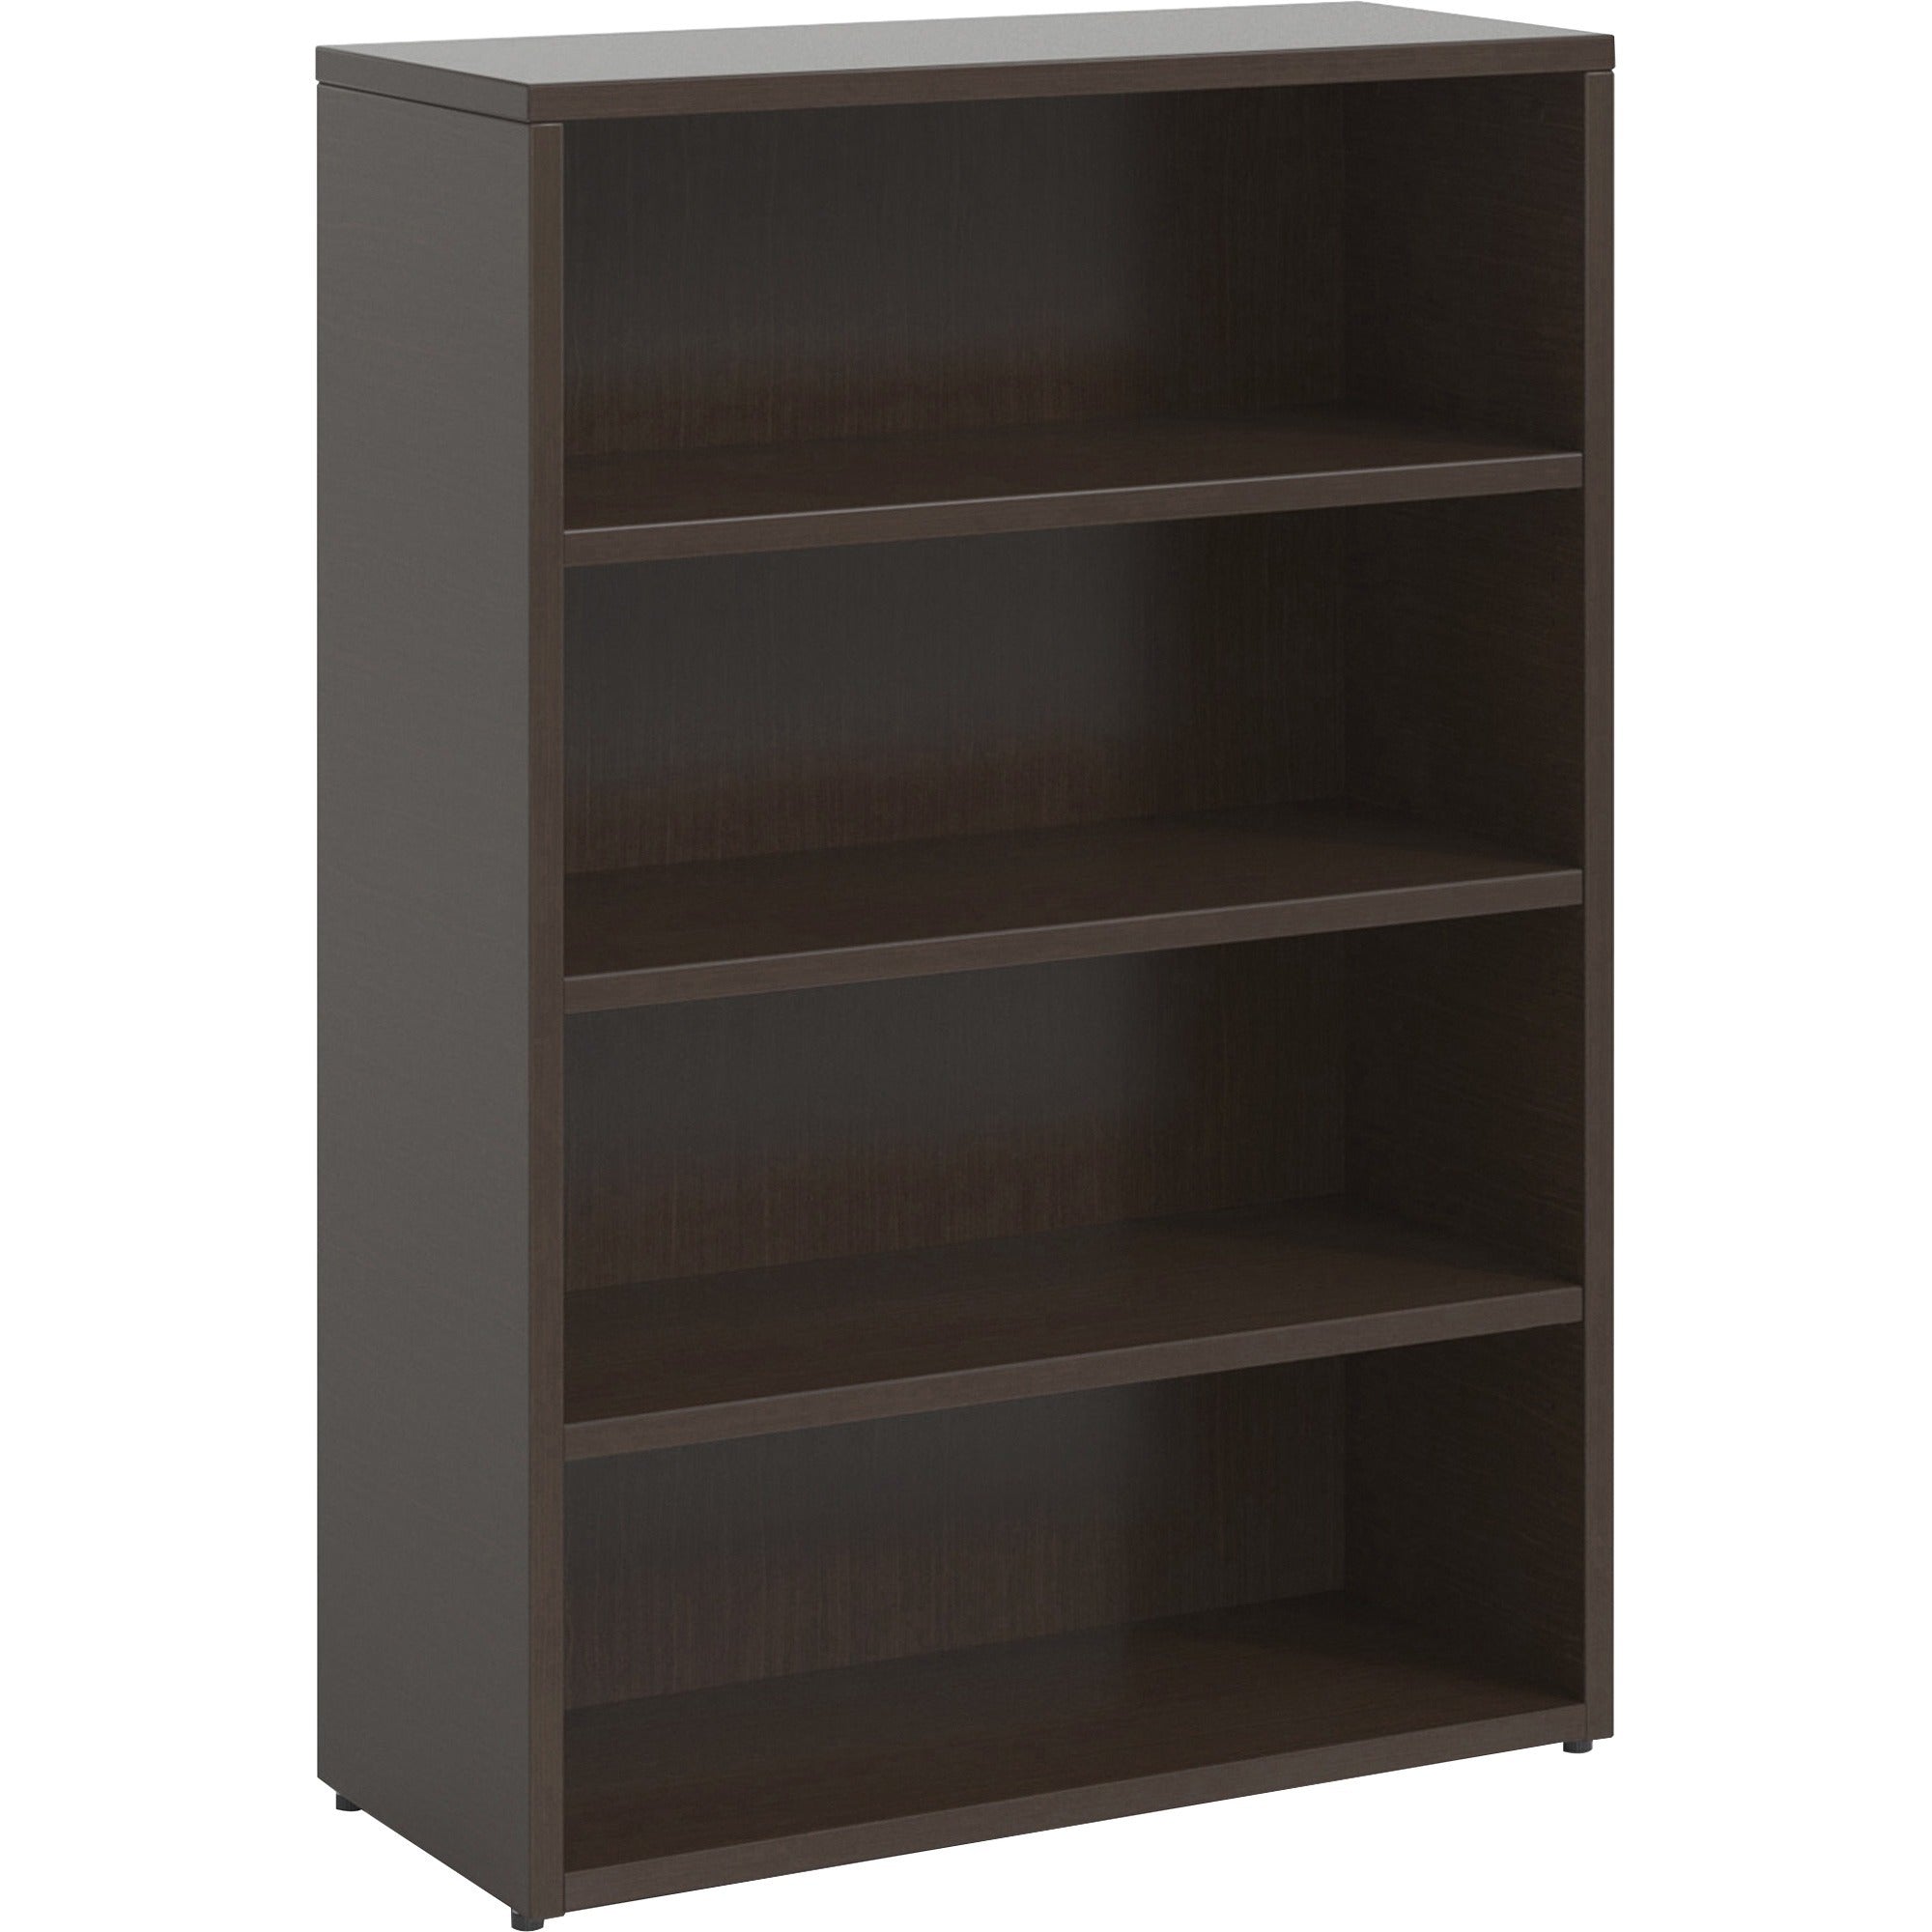 lorell-prominence-20-bookcase-34-x-1248--1-top-3-shelves-band-edge-material-particleboard-finish-laminate_llrpbk3448es - 1